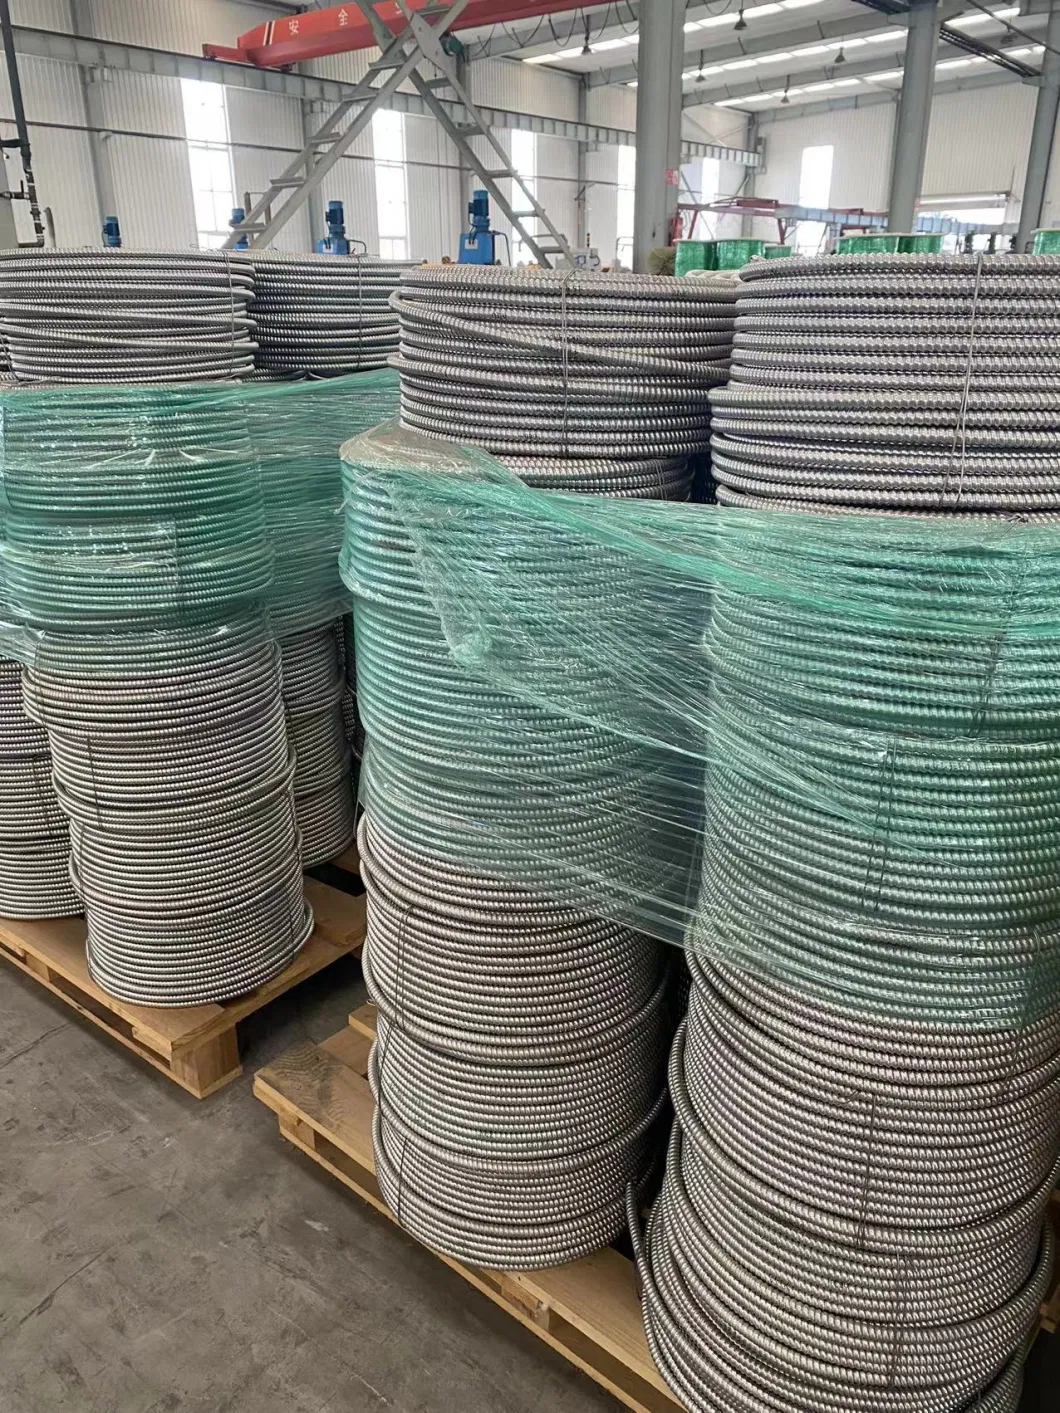 UL Certificated 16/2 14/2 12/2 Copper Thwn Thhn Insulated Grounding Conductor Armored Metal Clad Wire 10AWG Flexible Mc Cable